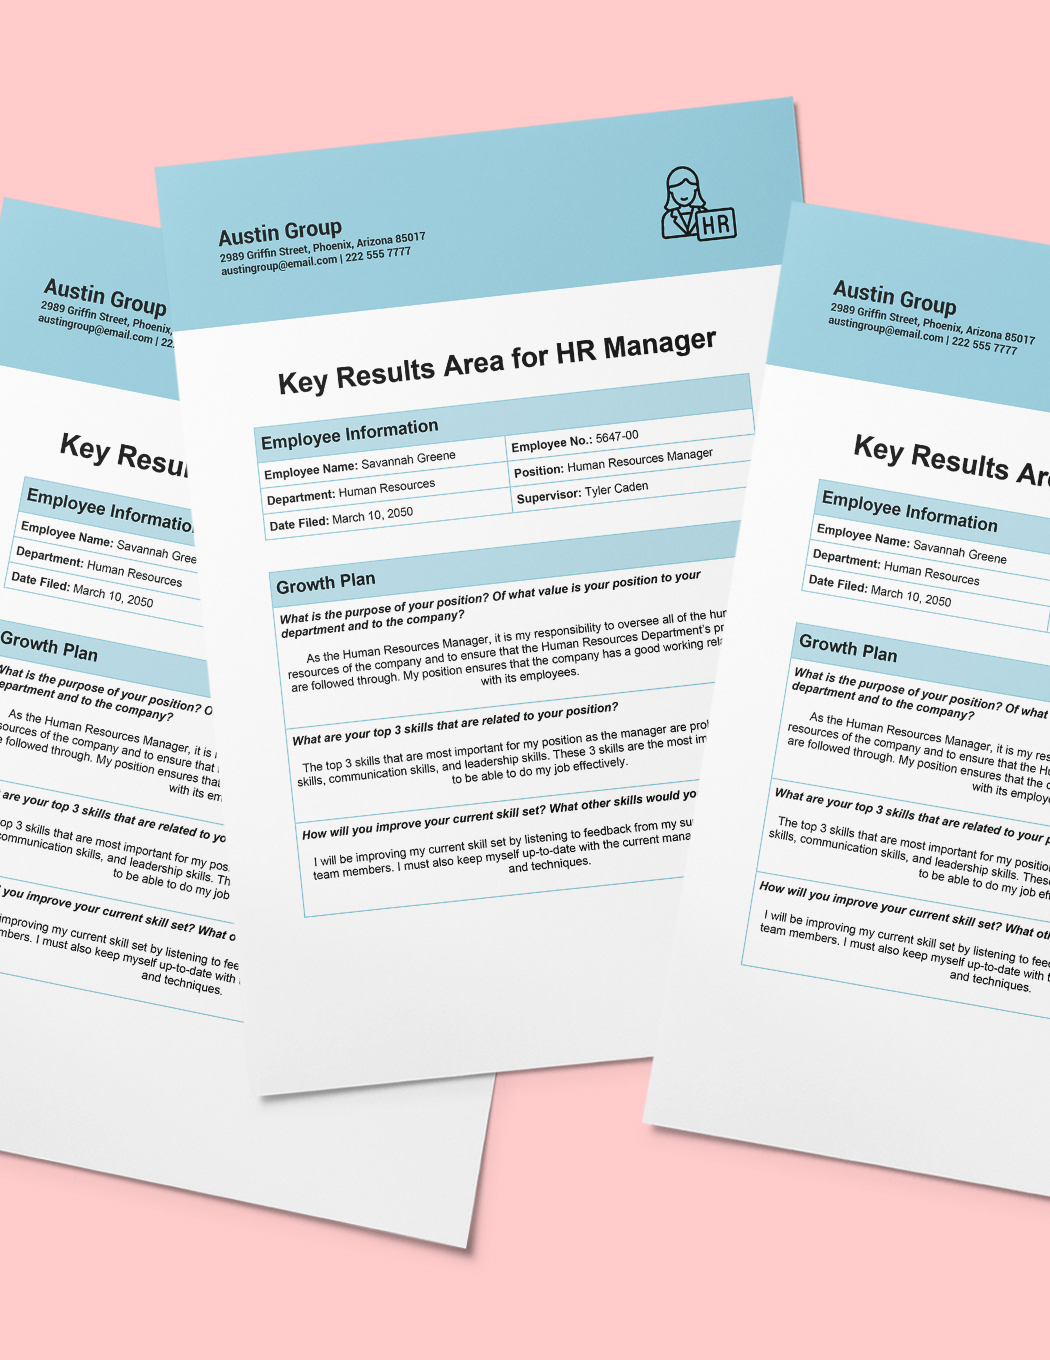 Key Results Area Template For HR Manager